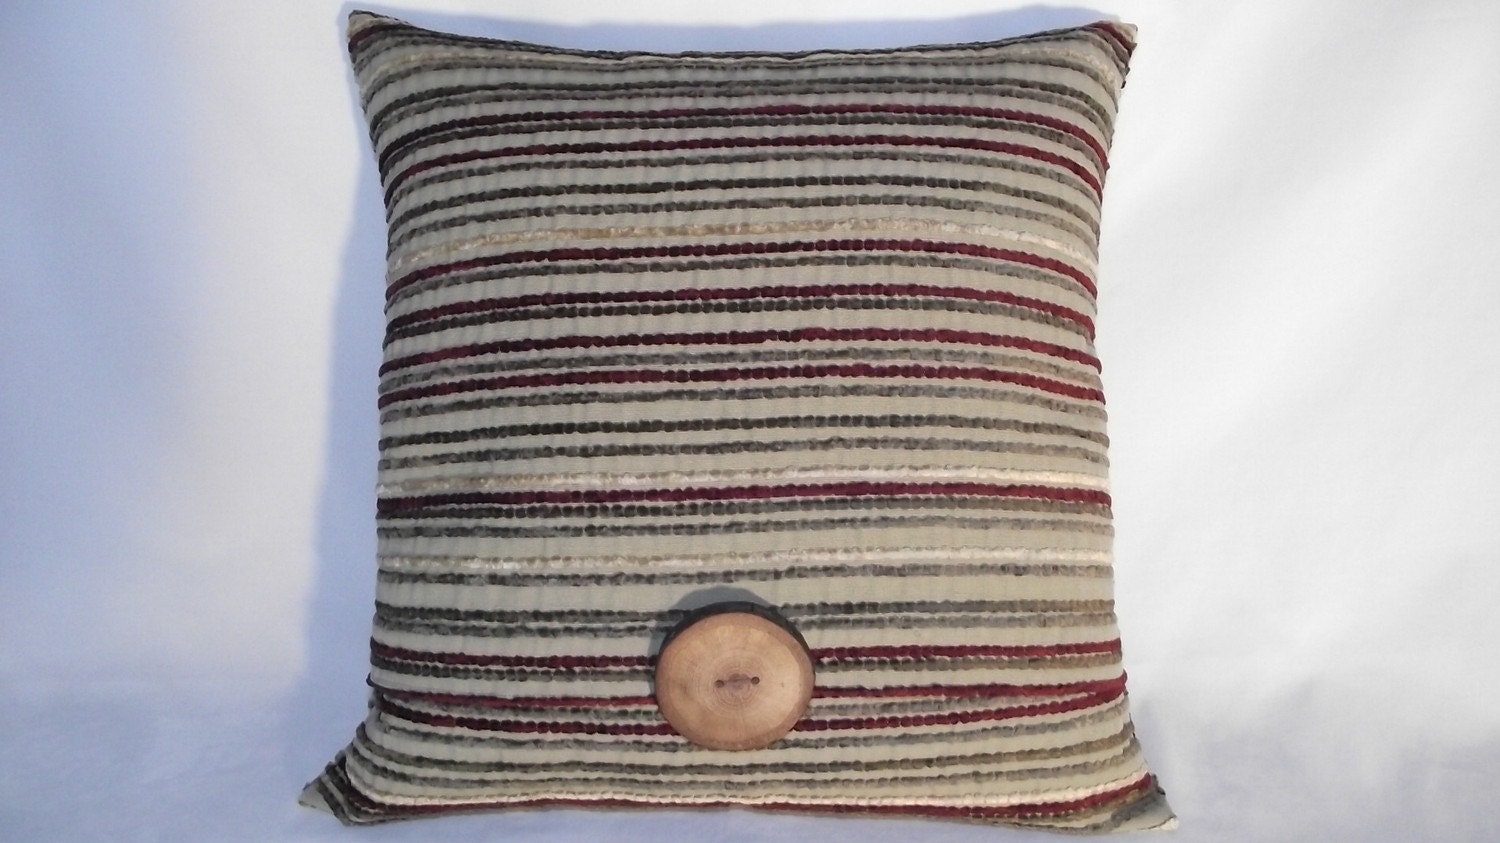 Pillow Cover Light Olive Chenille Stripes in Cranberry, Deep Olive, Tan. Accent Wood Button